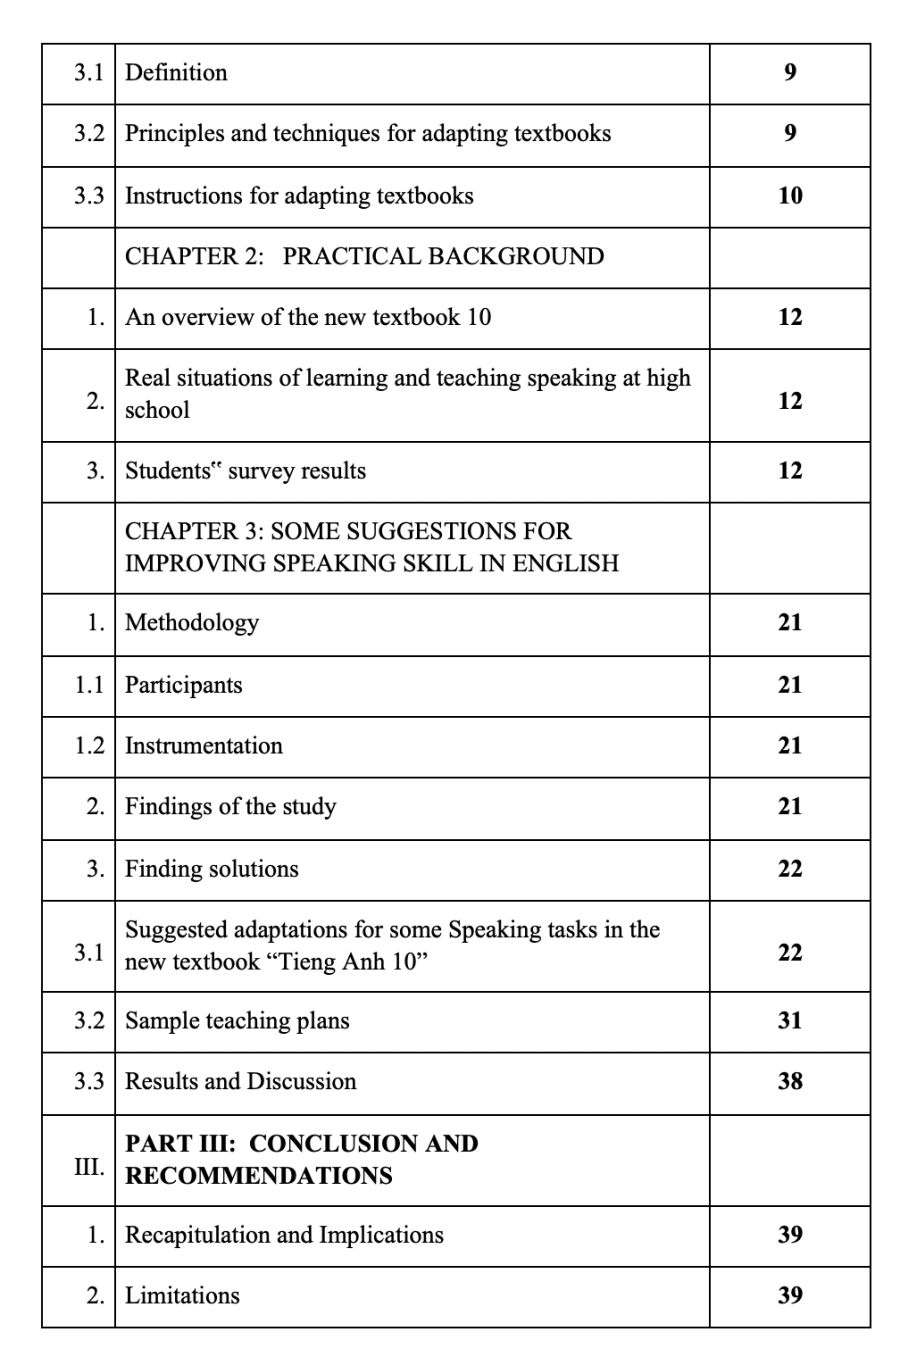 SKKN Suggestions for improving speaking skill in the new textbook “Tieng Anh 10” to encourage students’ participation in speaking activities